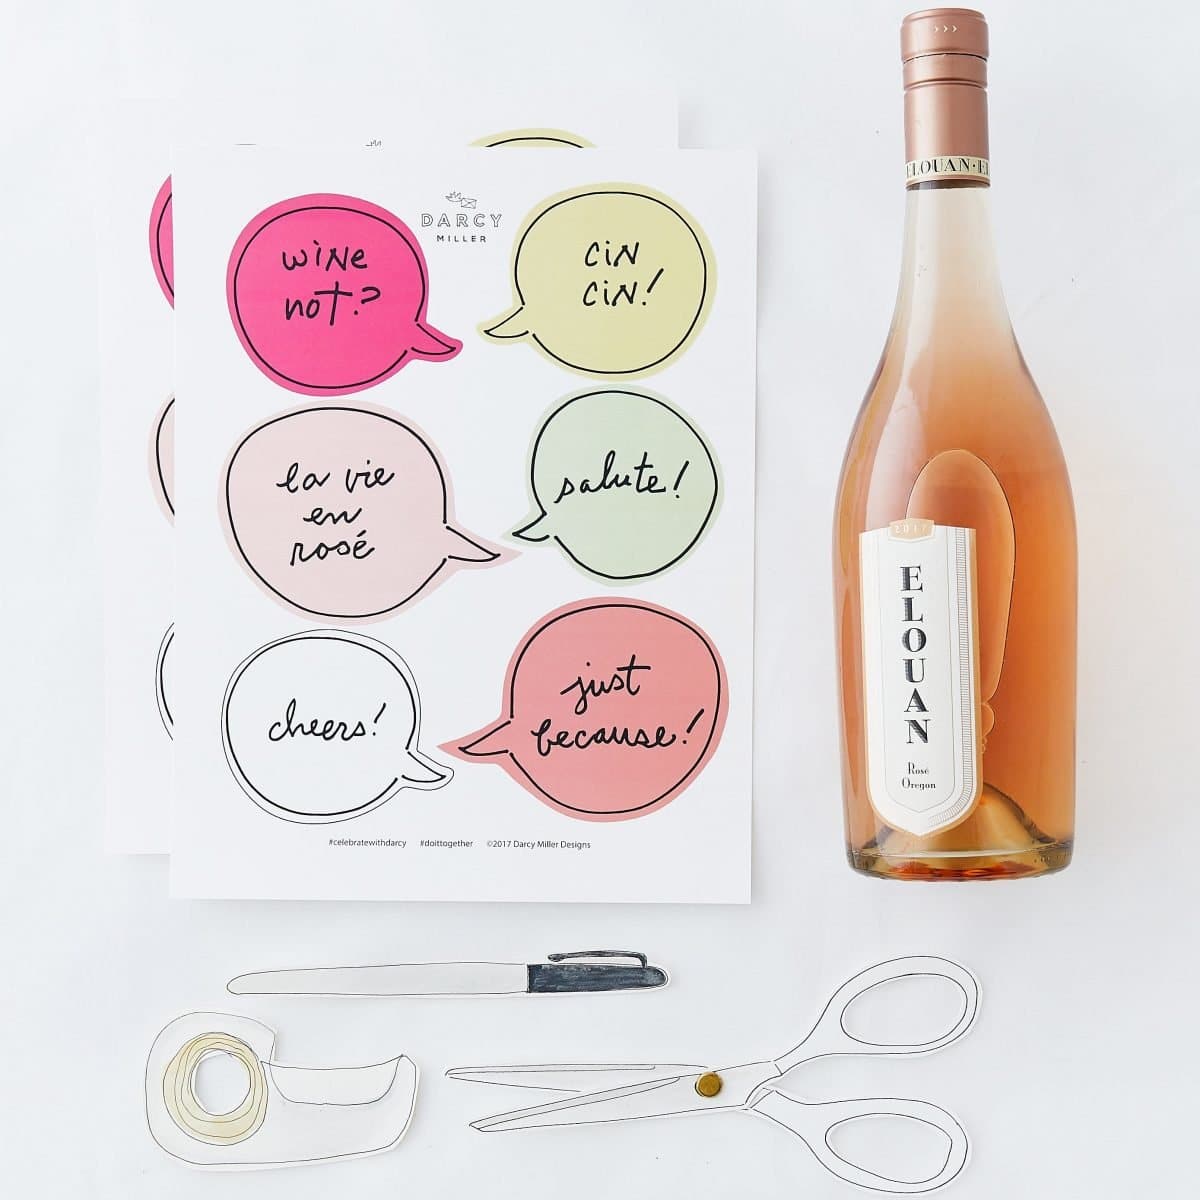 Darcy Miller Designs, Darcy Miller, Girls Night, Just Because, Wine Bottle, Paper Craft, Easy craft, friendship, thank you gift, gift tag